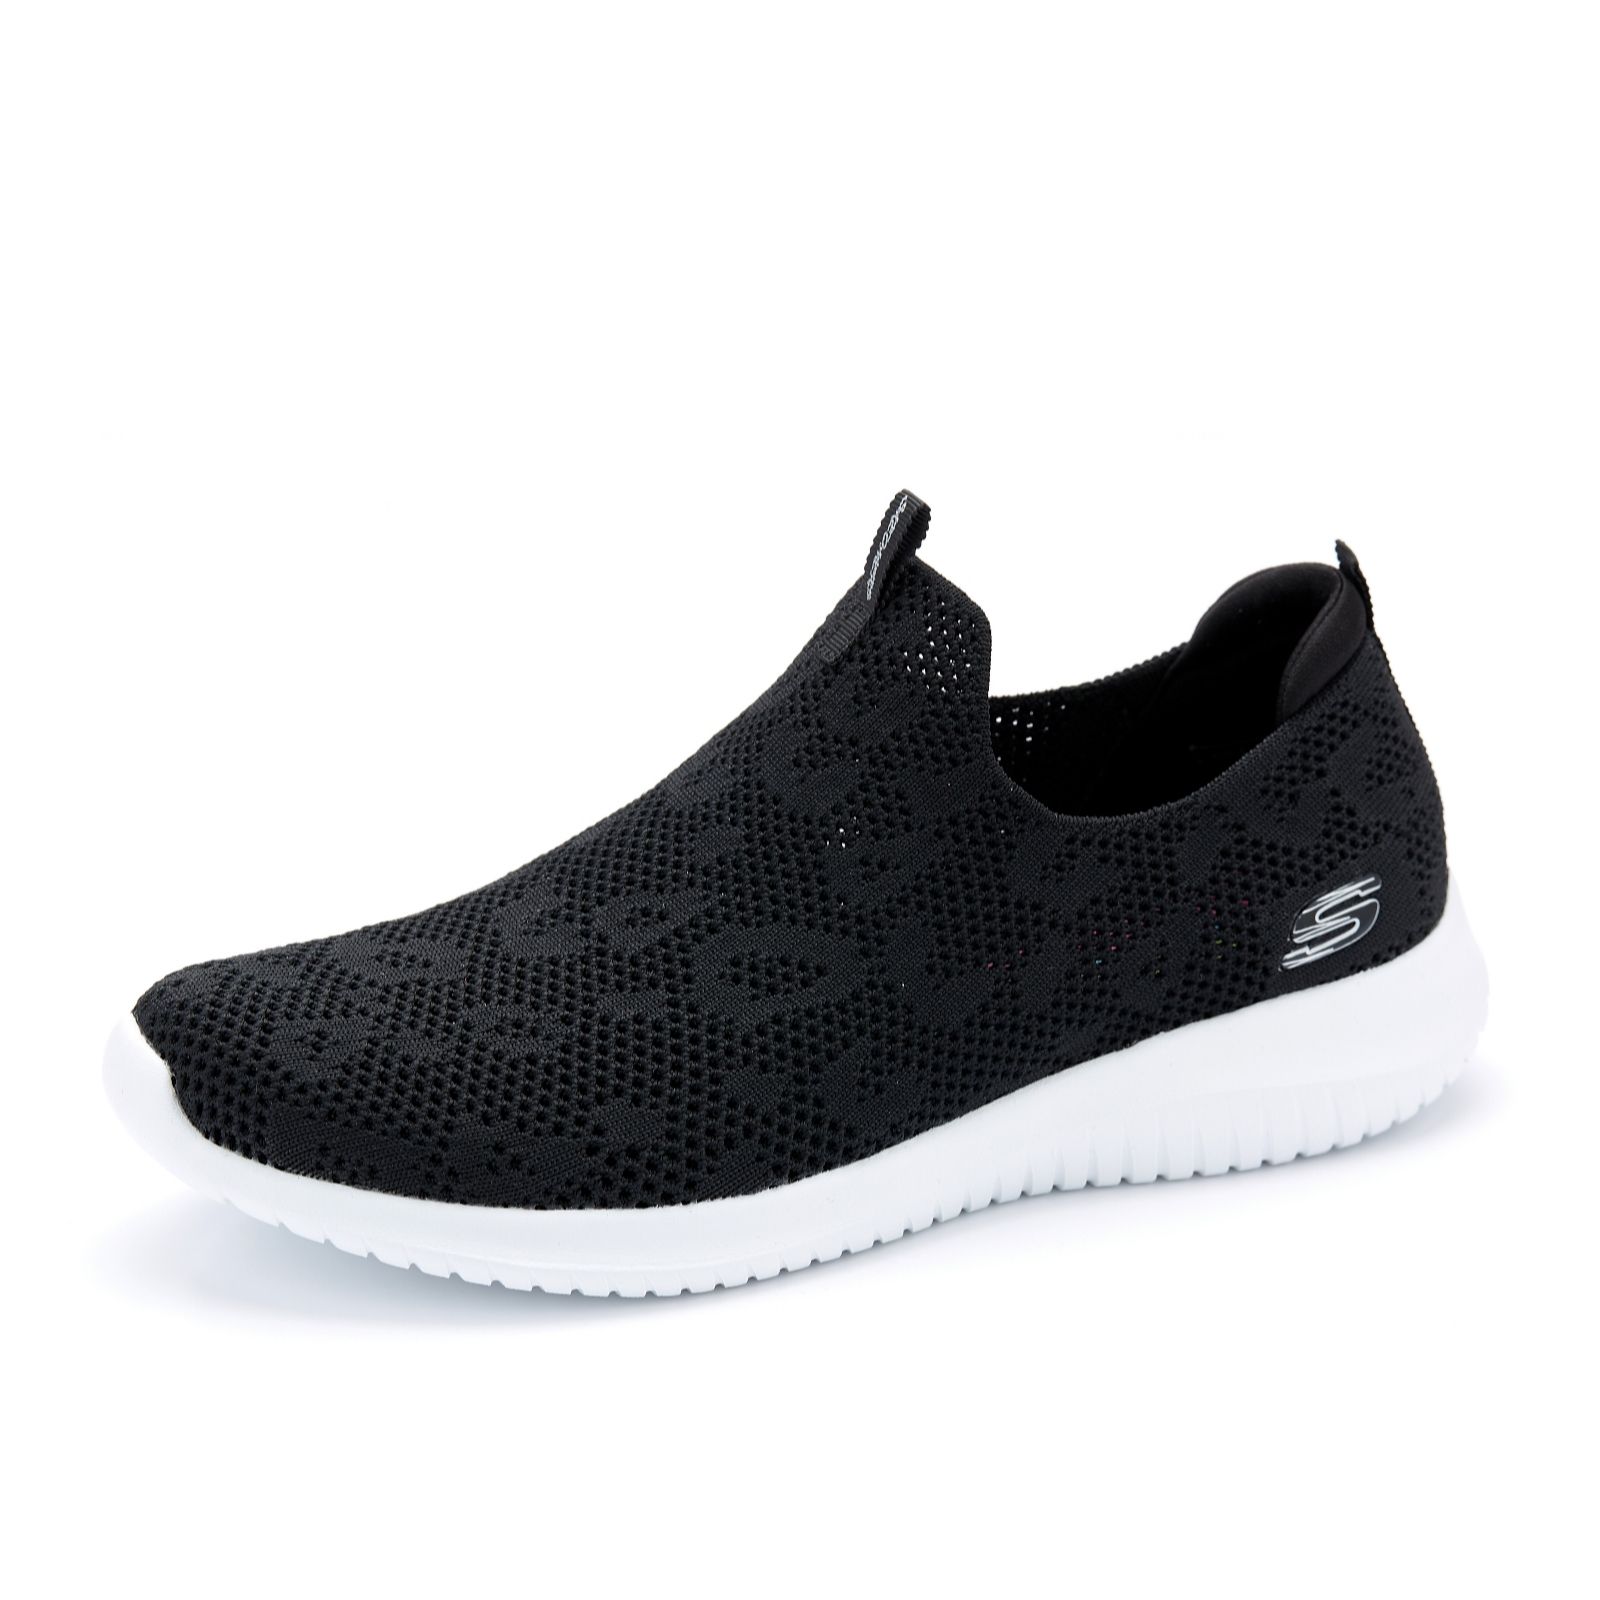 stretch knit from skechers